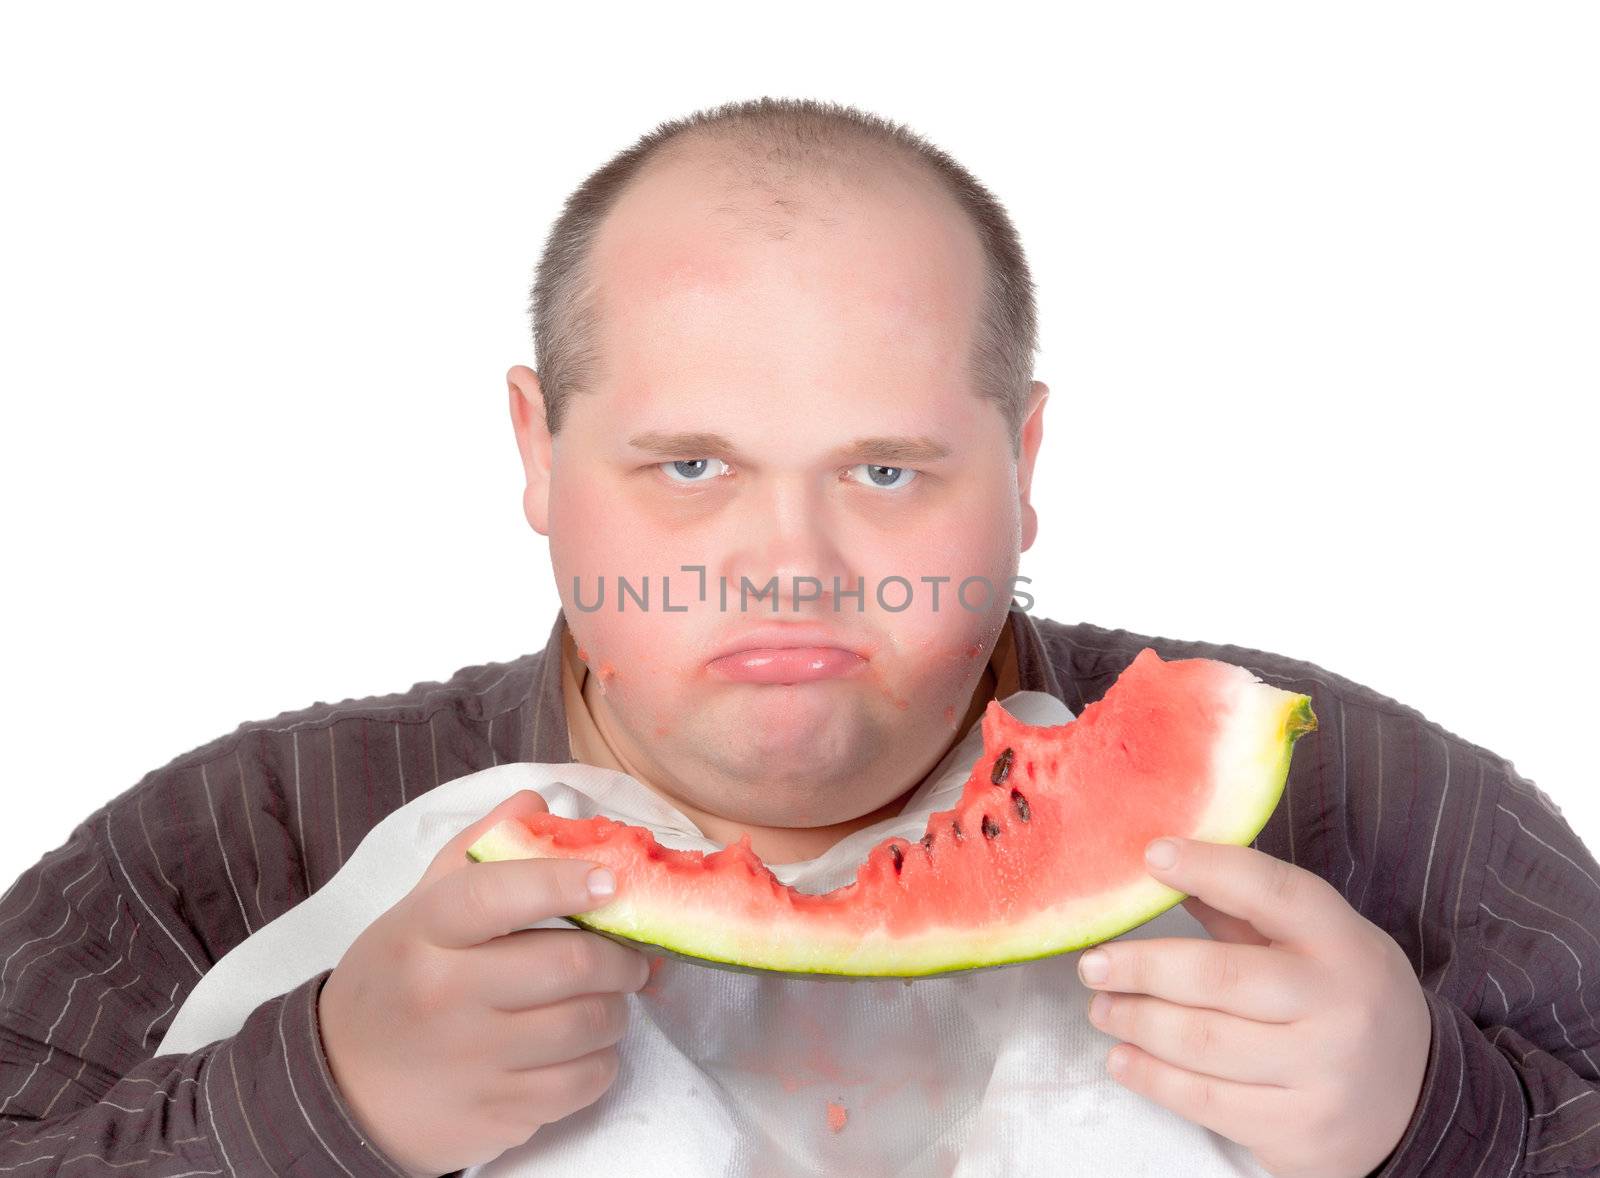 Obese man possessive of his food looking up from the slice of watermelon he is eating with a scowl and angry stare